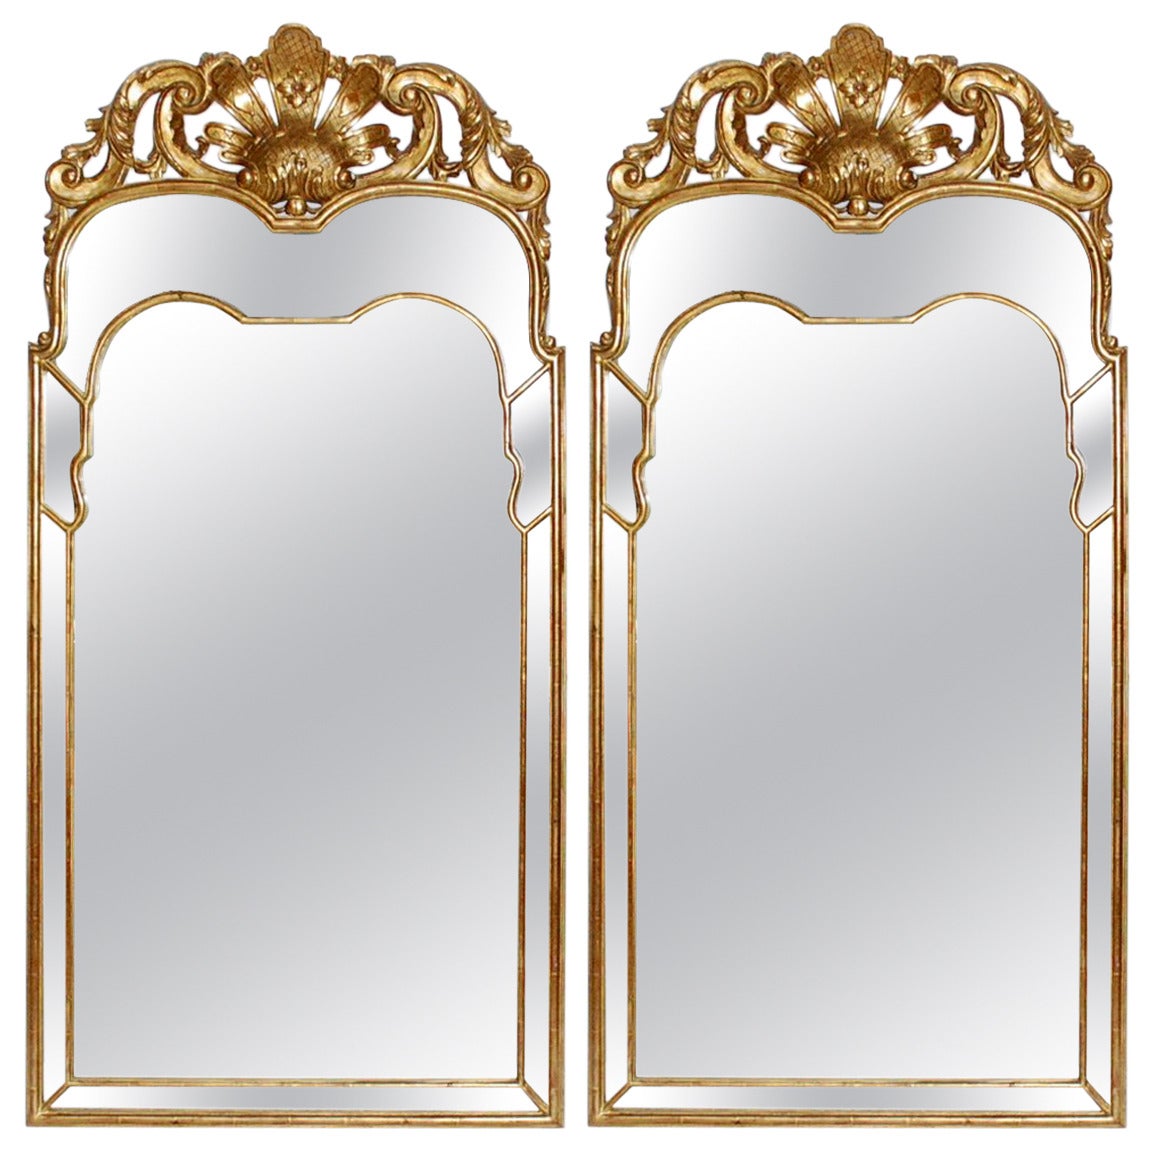 Pair of French Rococo Style Mirrors